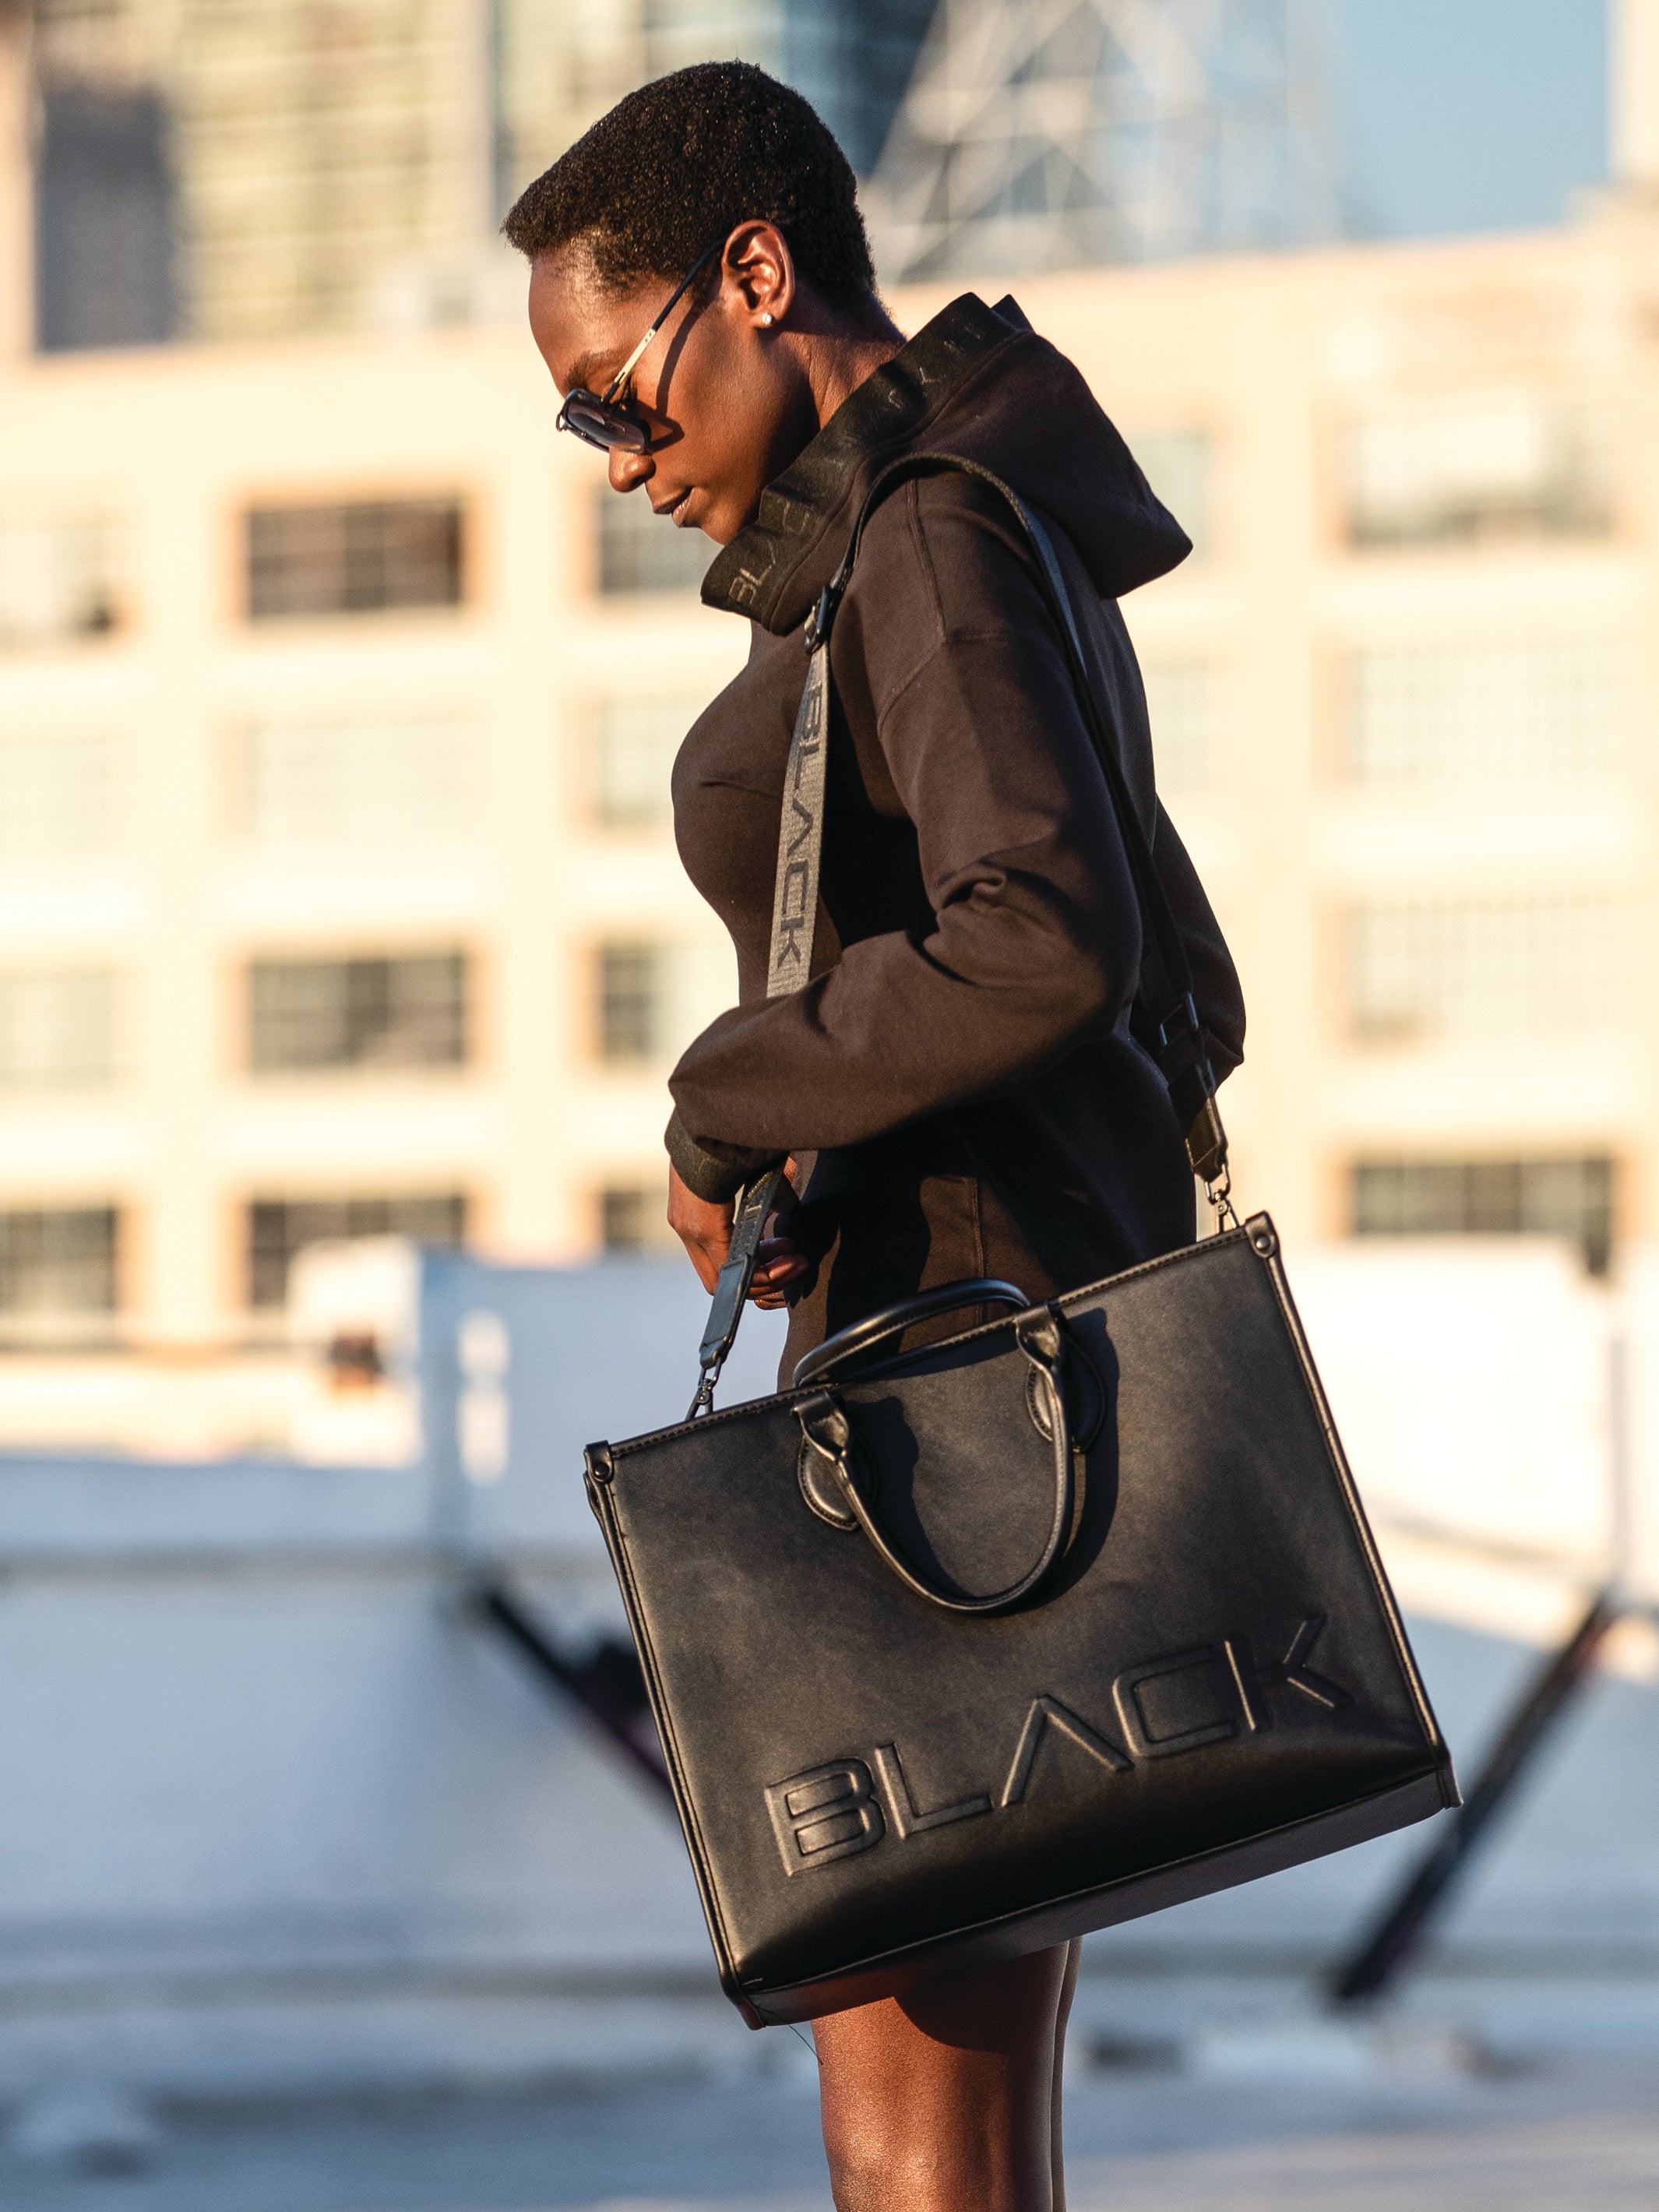 Actively Black "On The Move" Tote